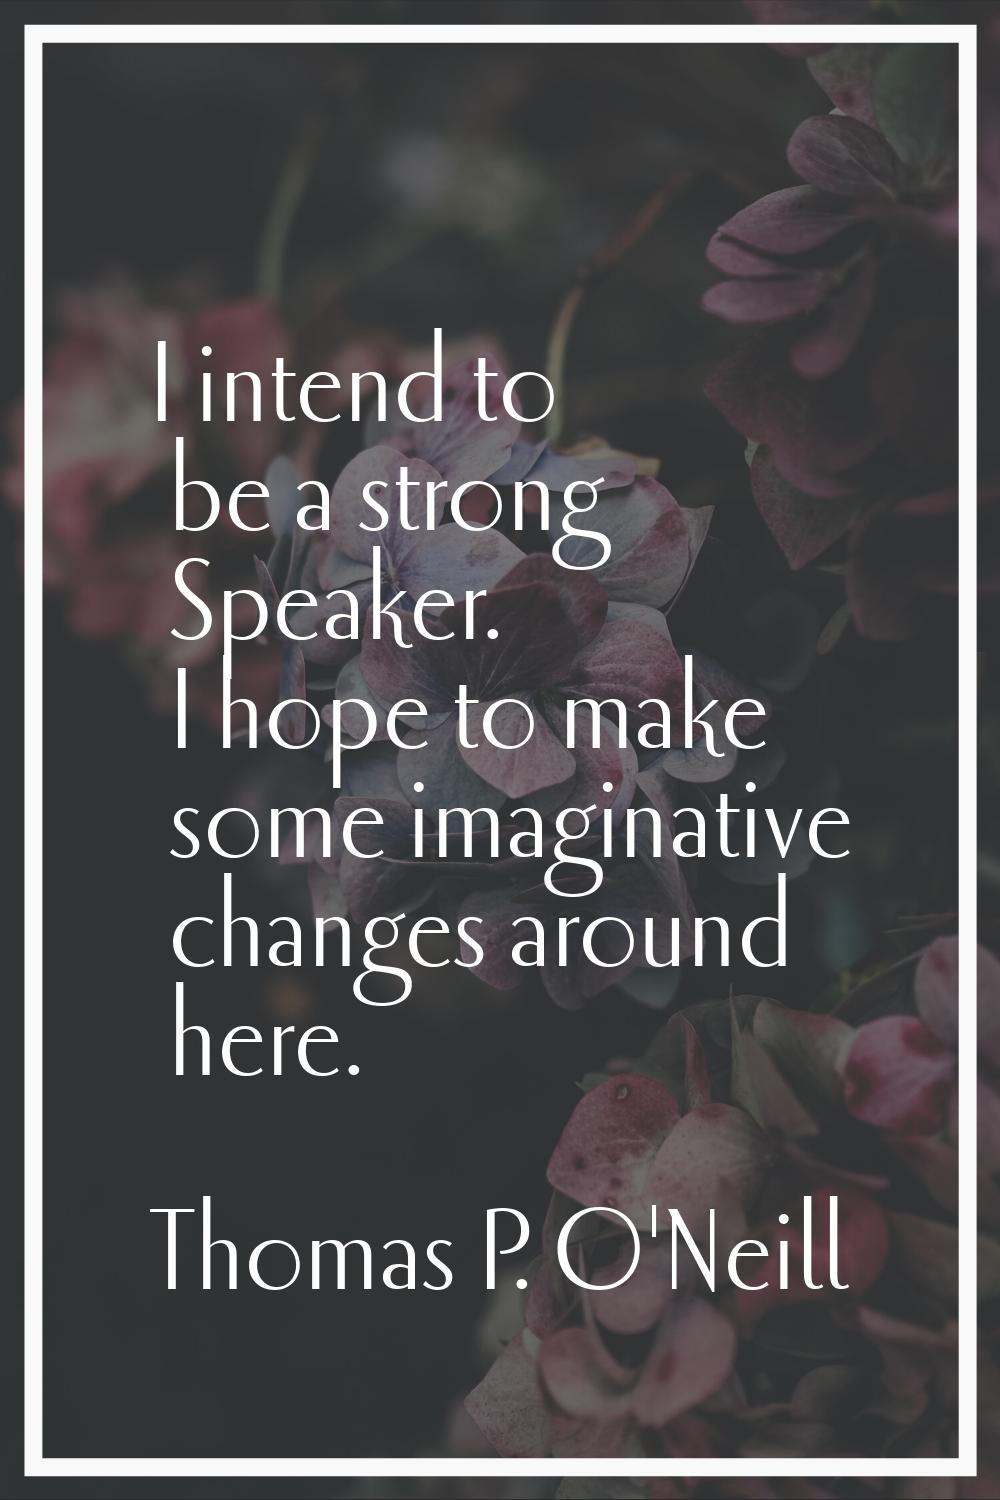 I intend to be a strong Speaker. I hope to make some imaginative changes around here.